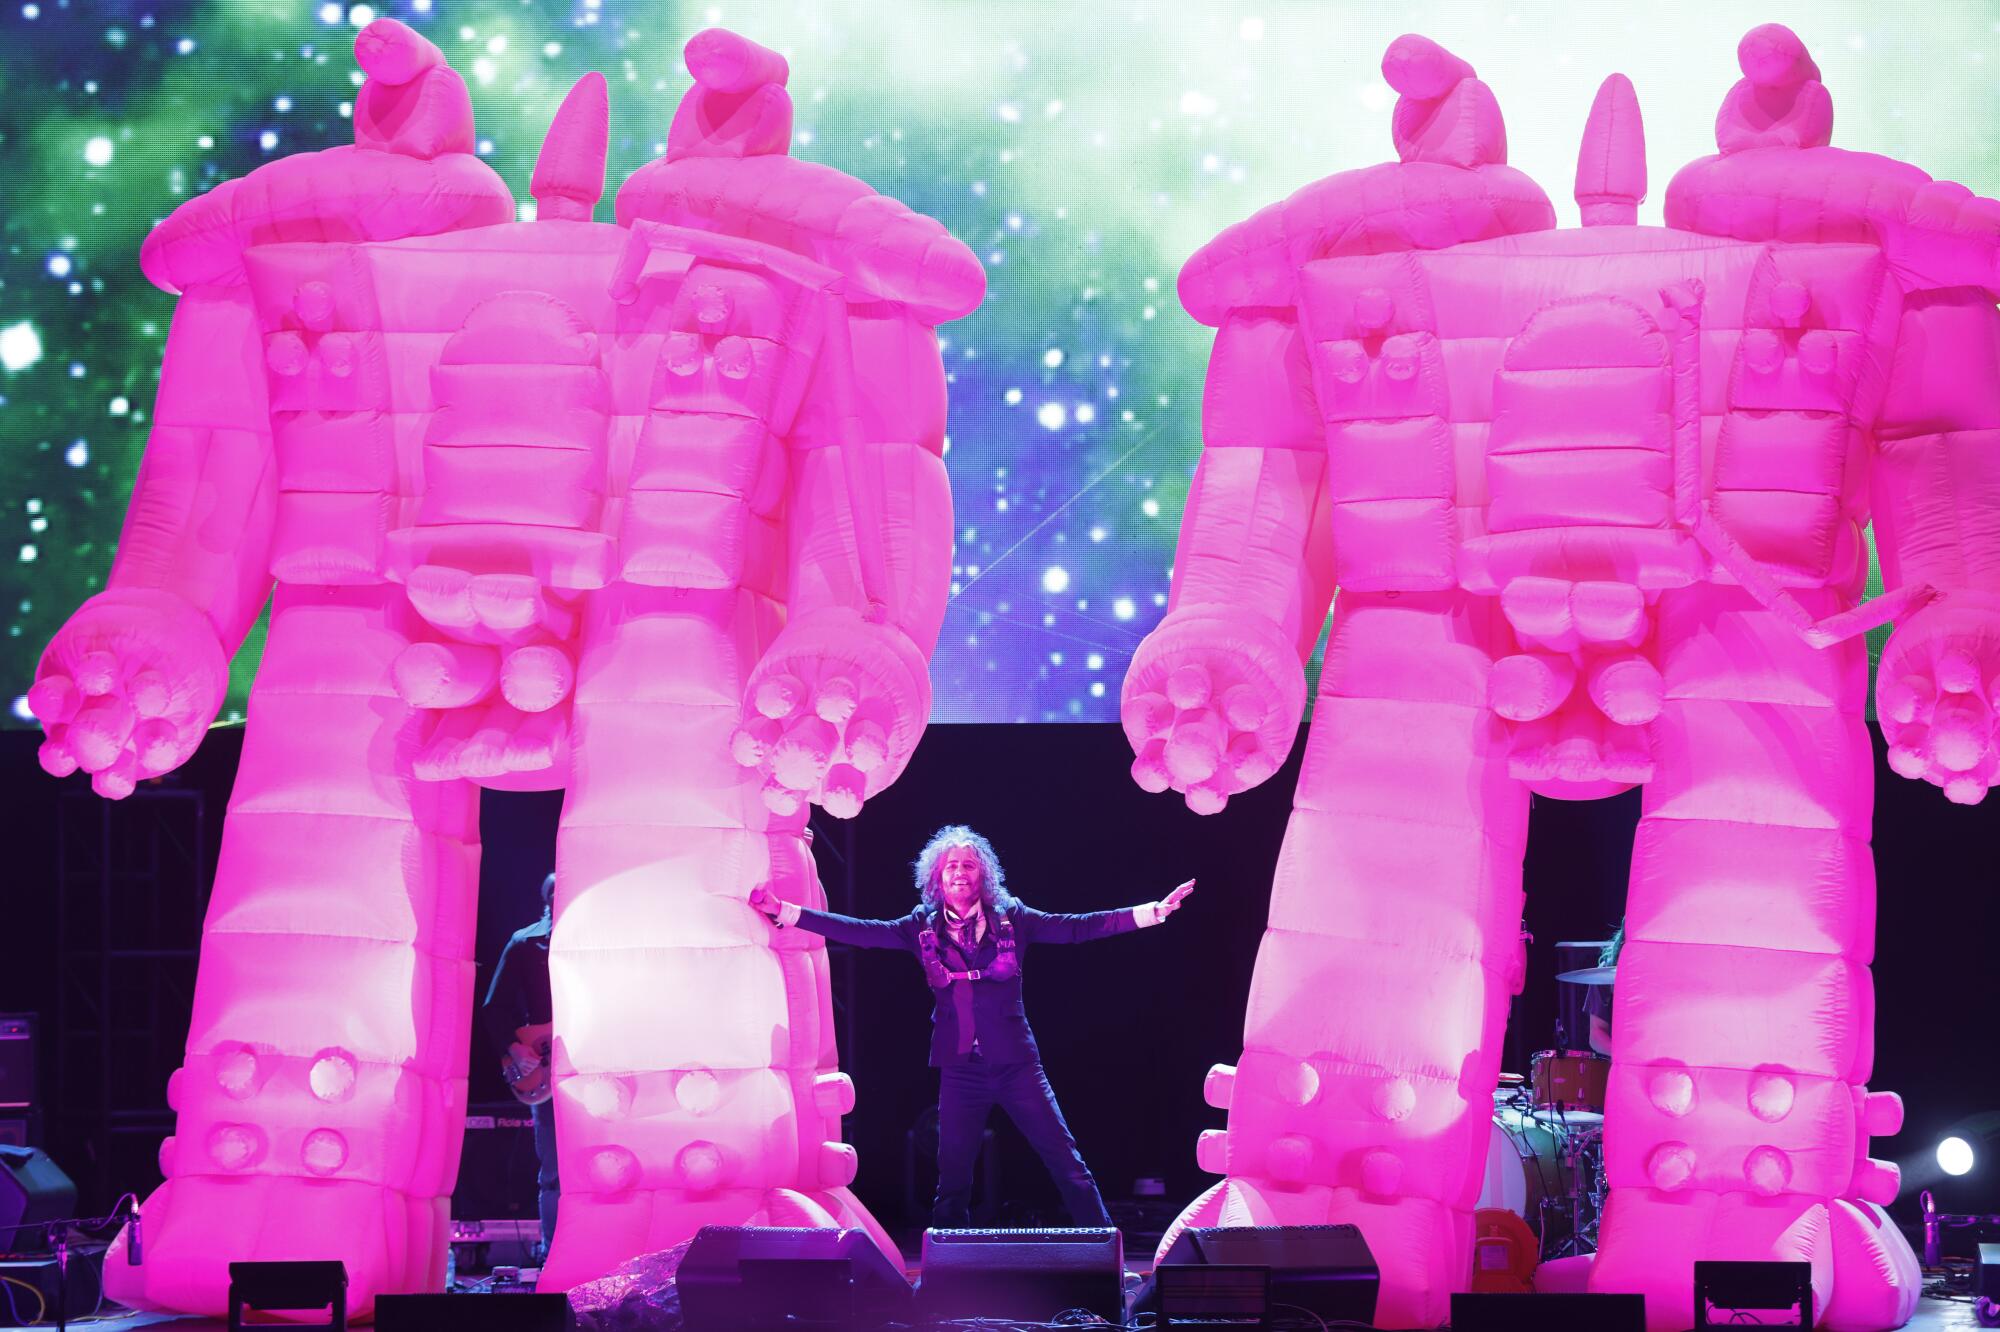 Wayne Coyne of The Flaming Lips performs during the VetsAid 2023 concert.